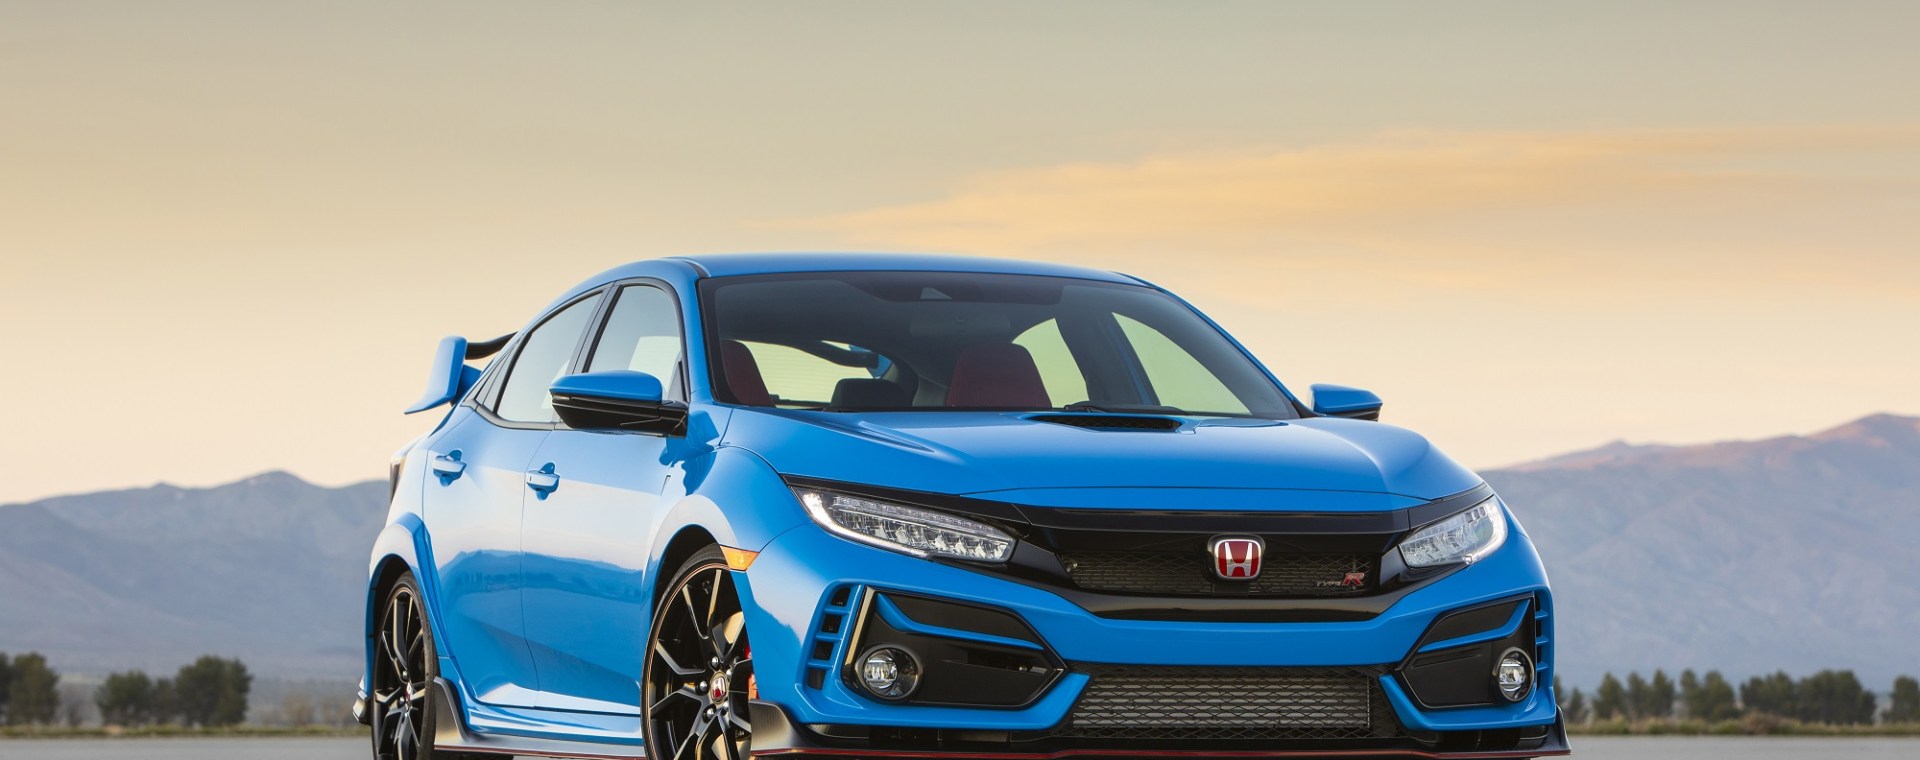 The 2021 Civic Type R will have a hard time competing against the new Honda hatch, the 2023 Civic Type R.